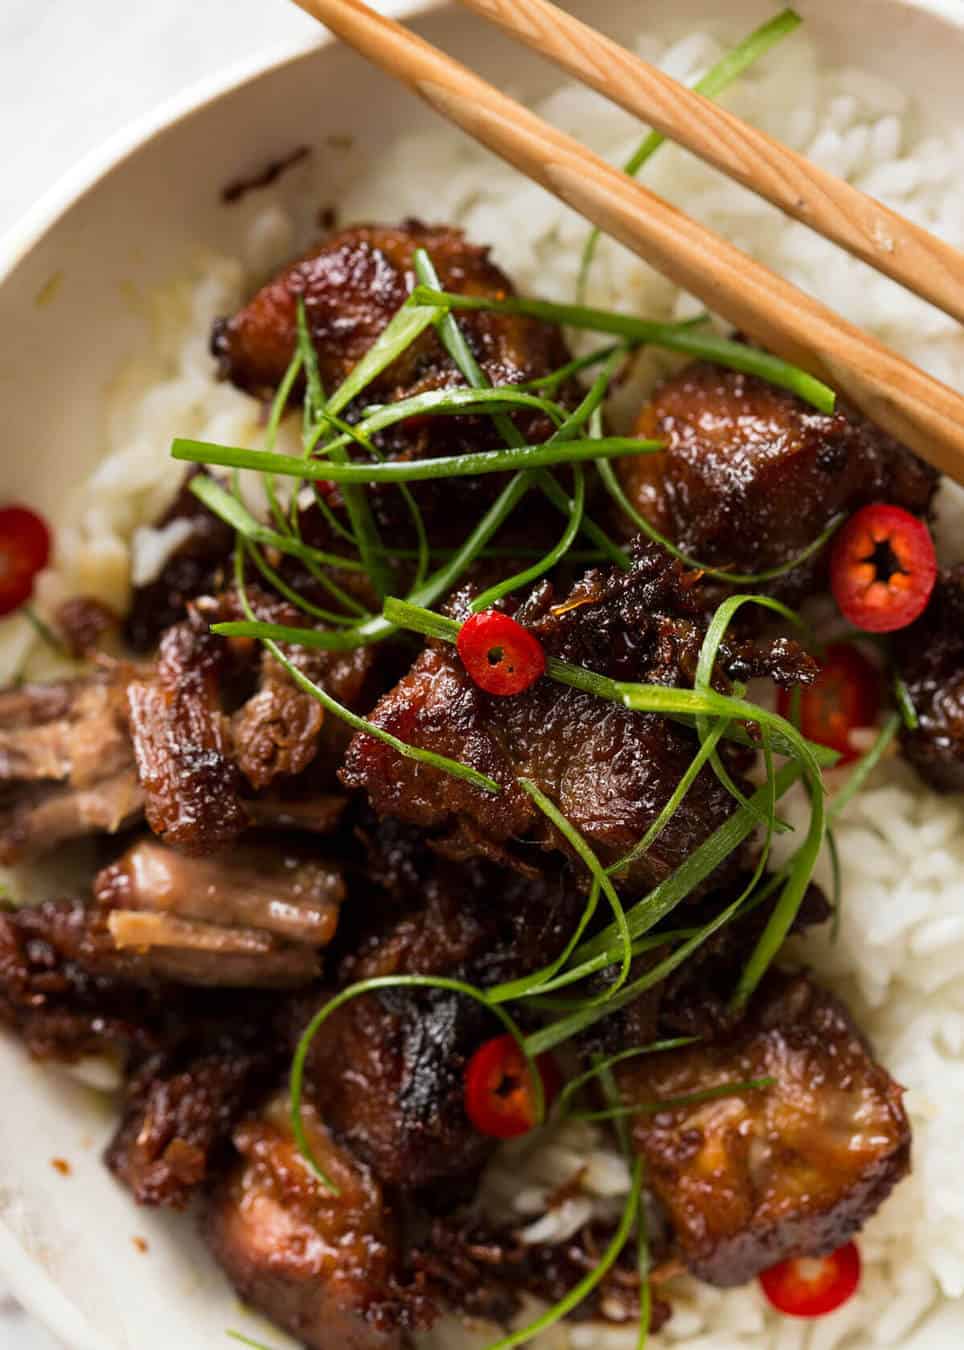 Vietnamese Caramel Pork is a simple, magical recipe - tender pork in a sweet savoury glaze and no hunting down unusual ingredients! www.recipetineats.com